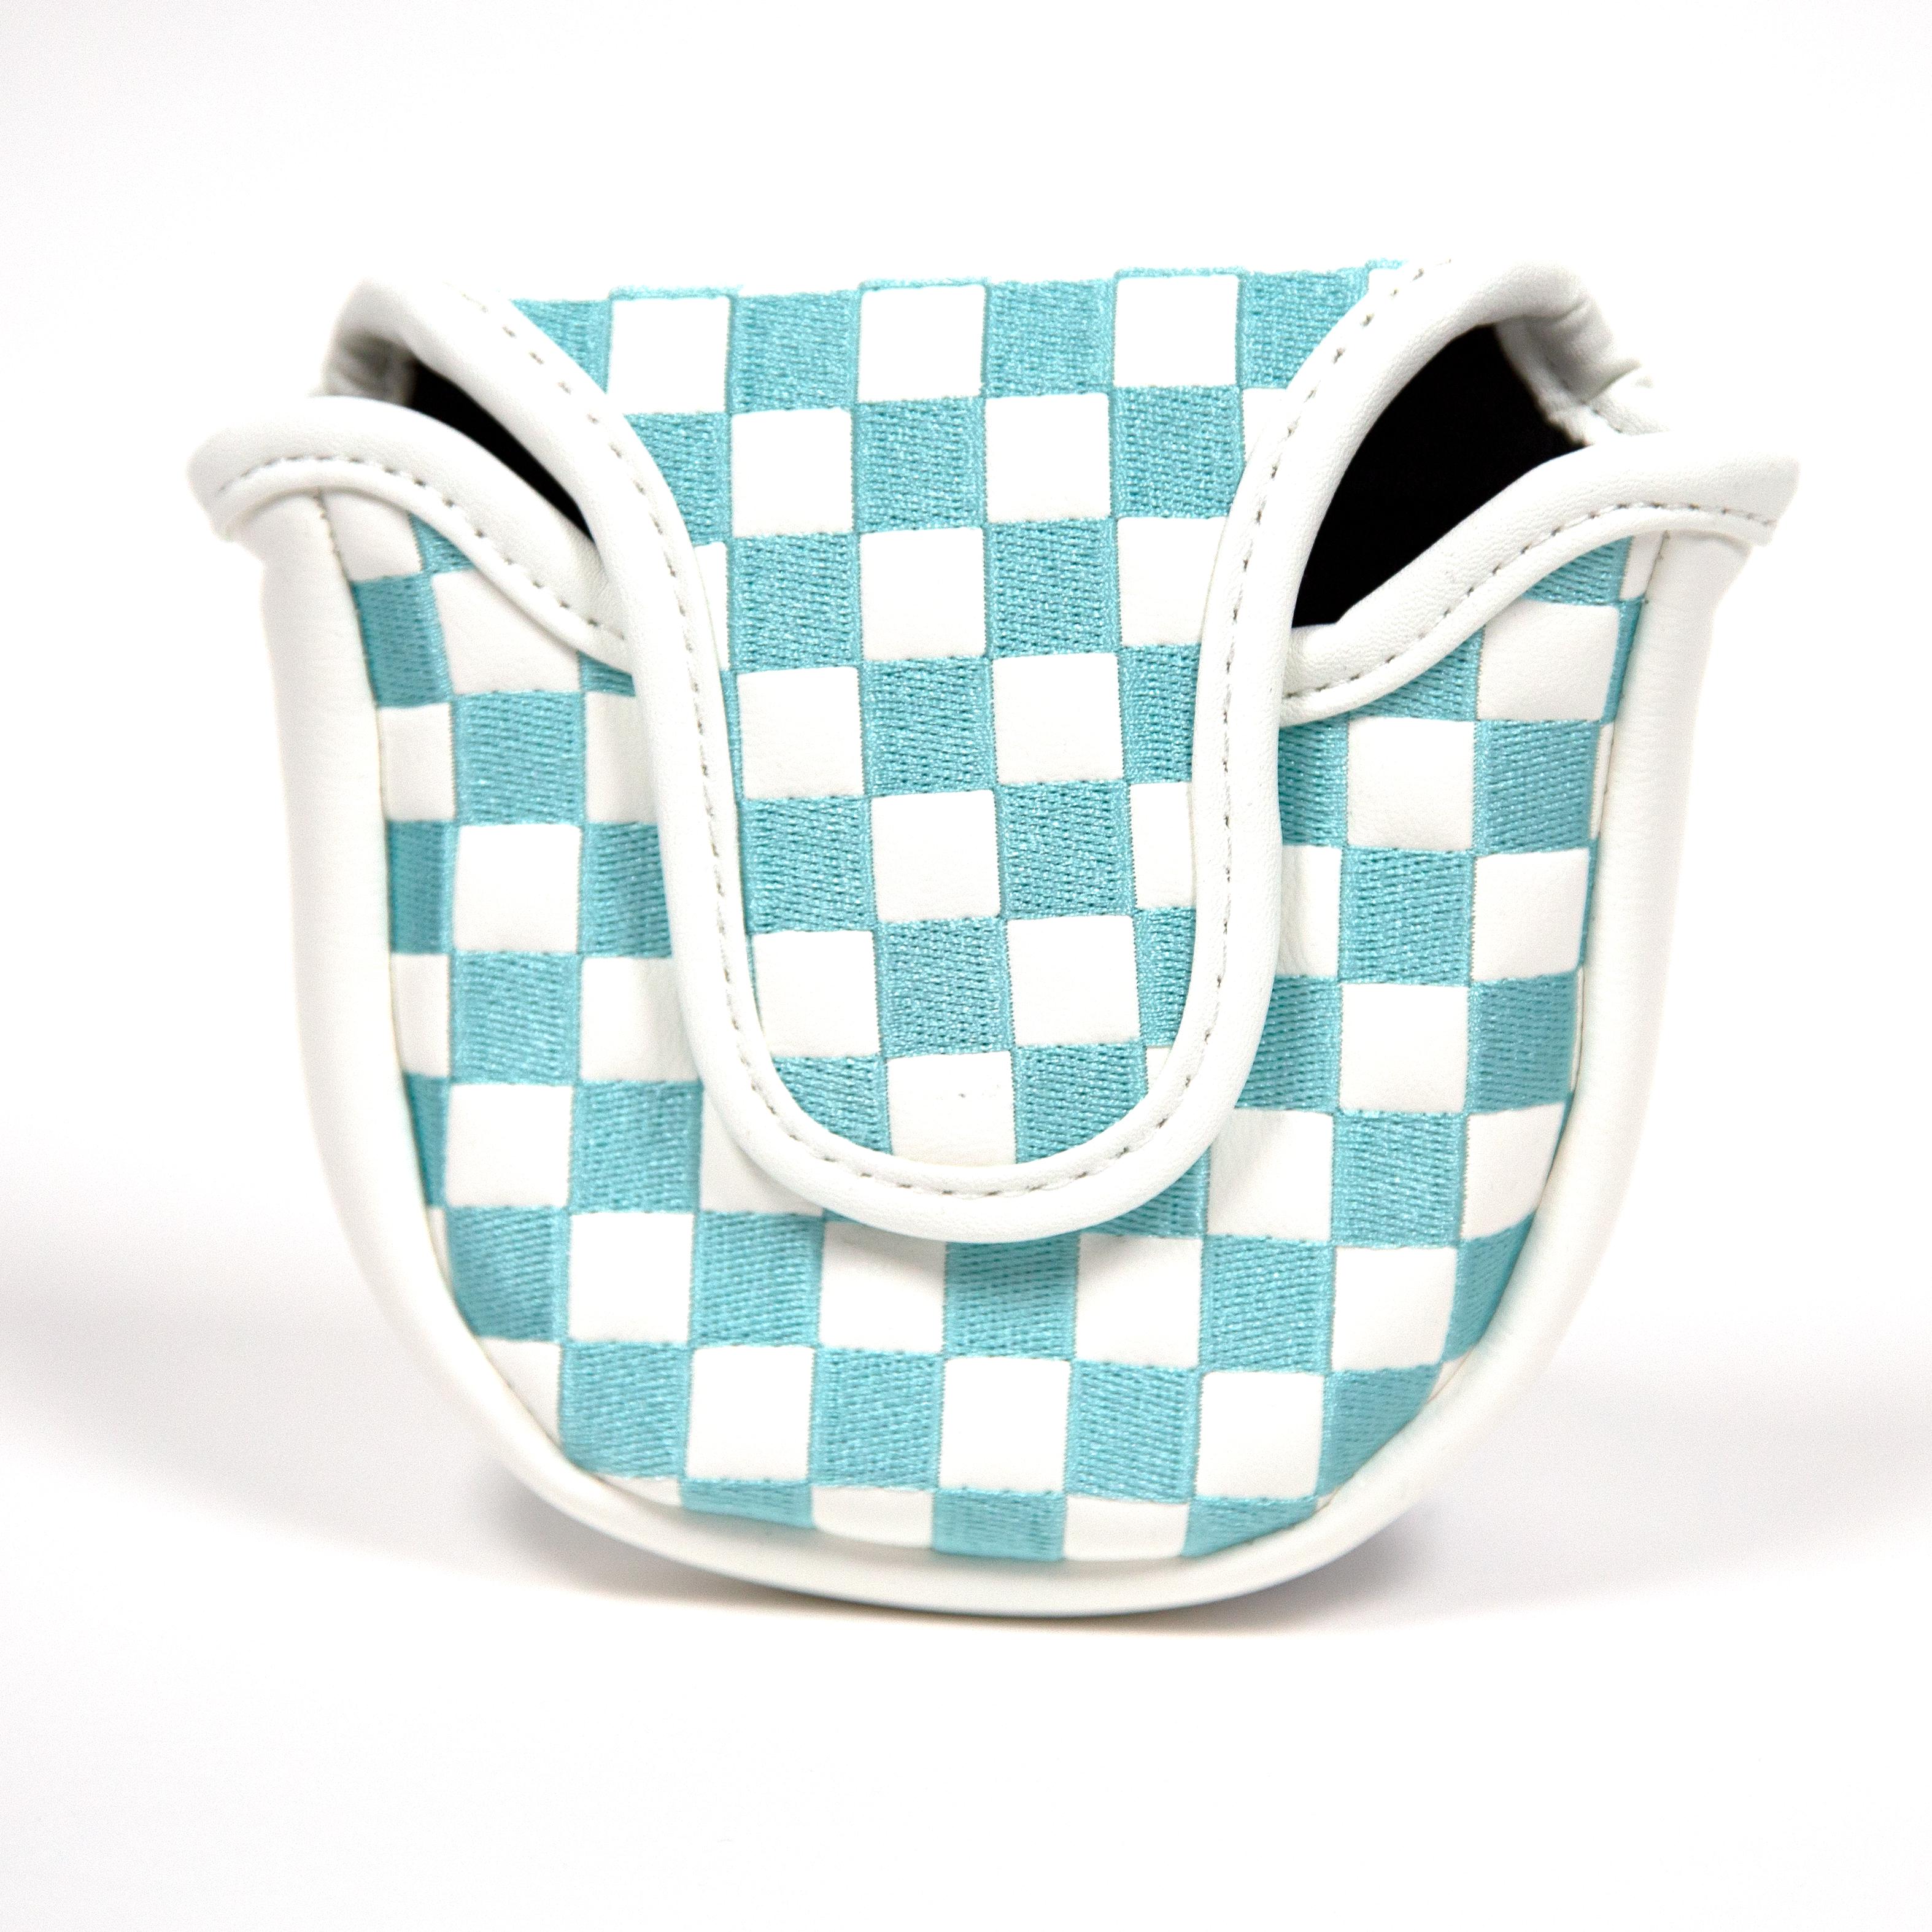 Barstool Golf Checkered Mallet Putter Cover-Golf Accessories-Fore Play-Teal-One Size-Barstool Sports